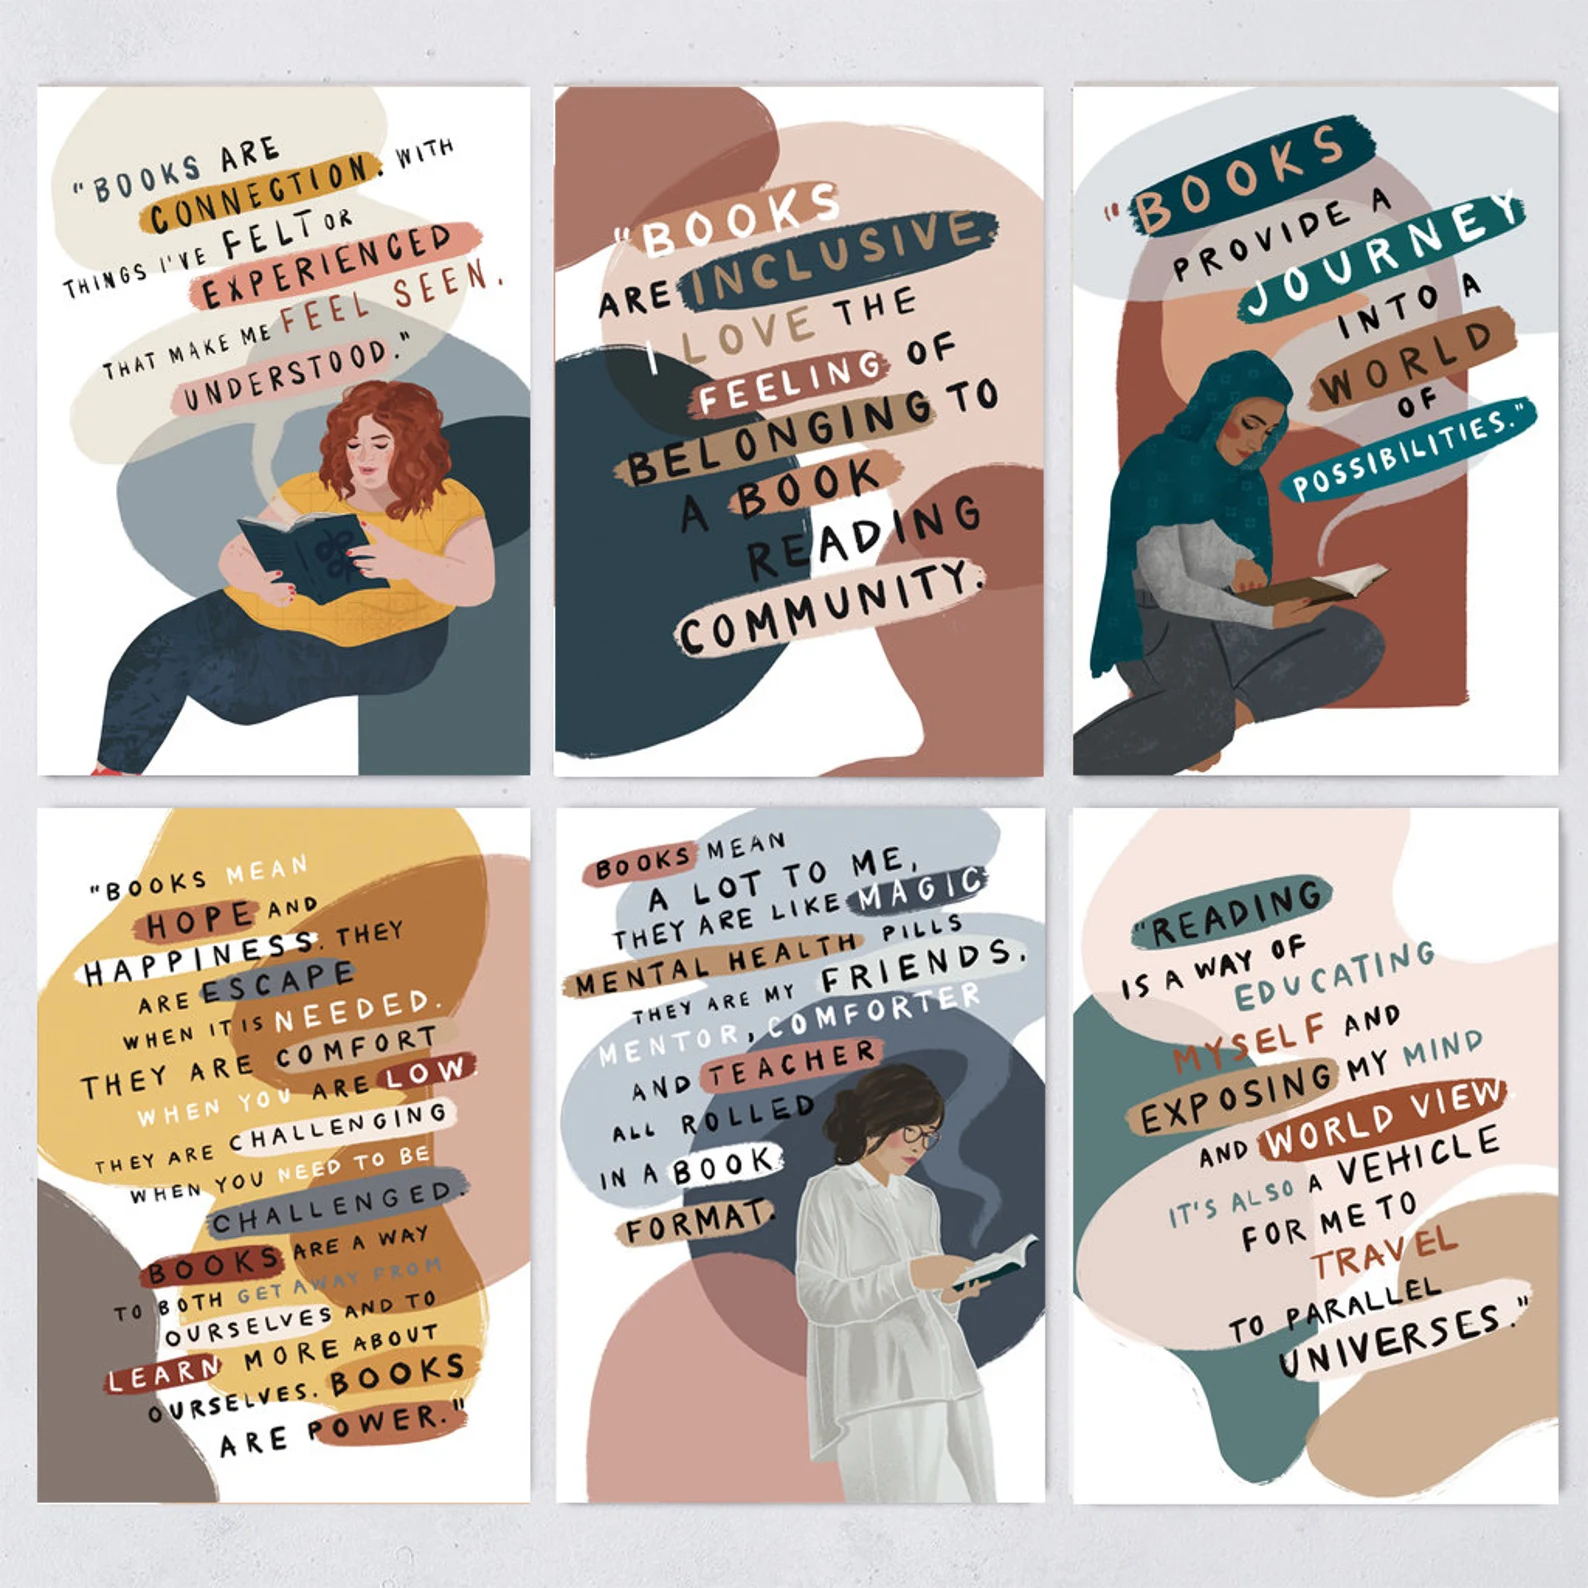 Six postcards with art of people reading, in subdued colors. Quotes about books and reading are superimposed over the art, such as: "Books provide a journey into a world of possibilities."